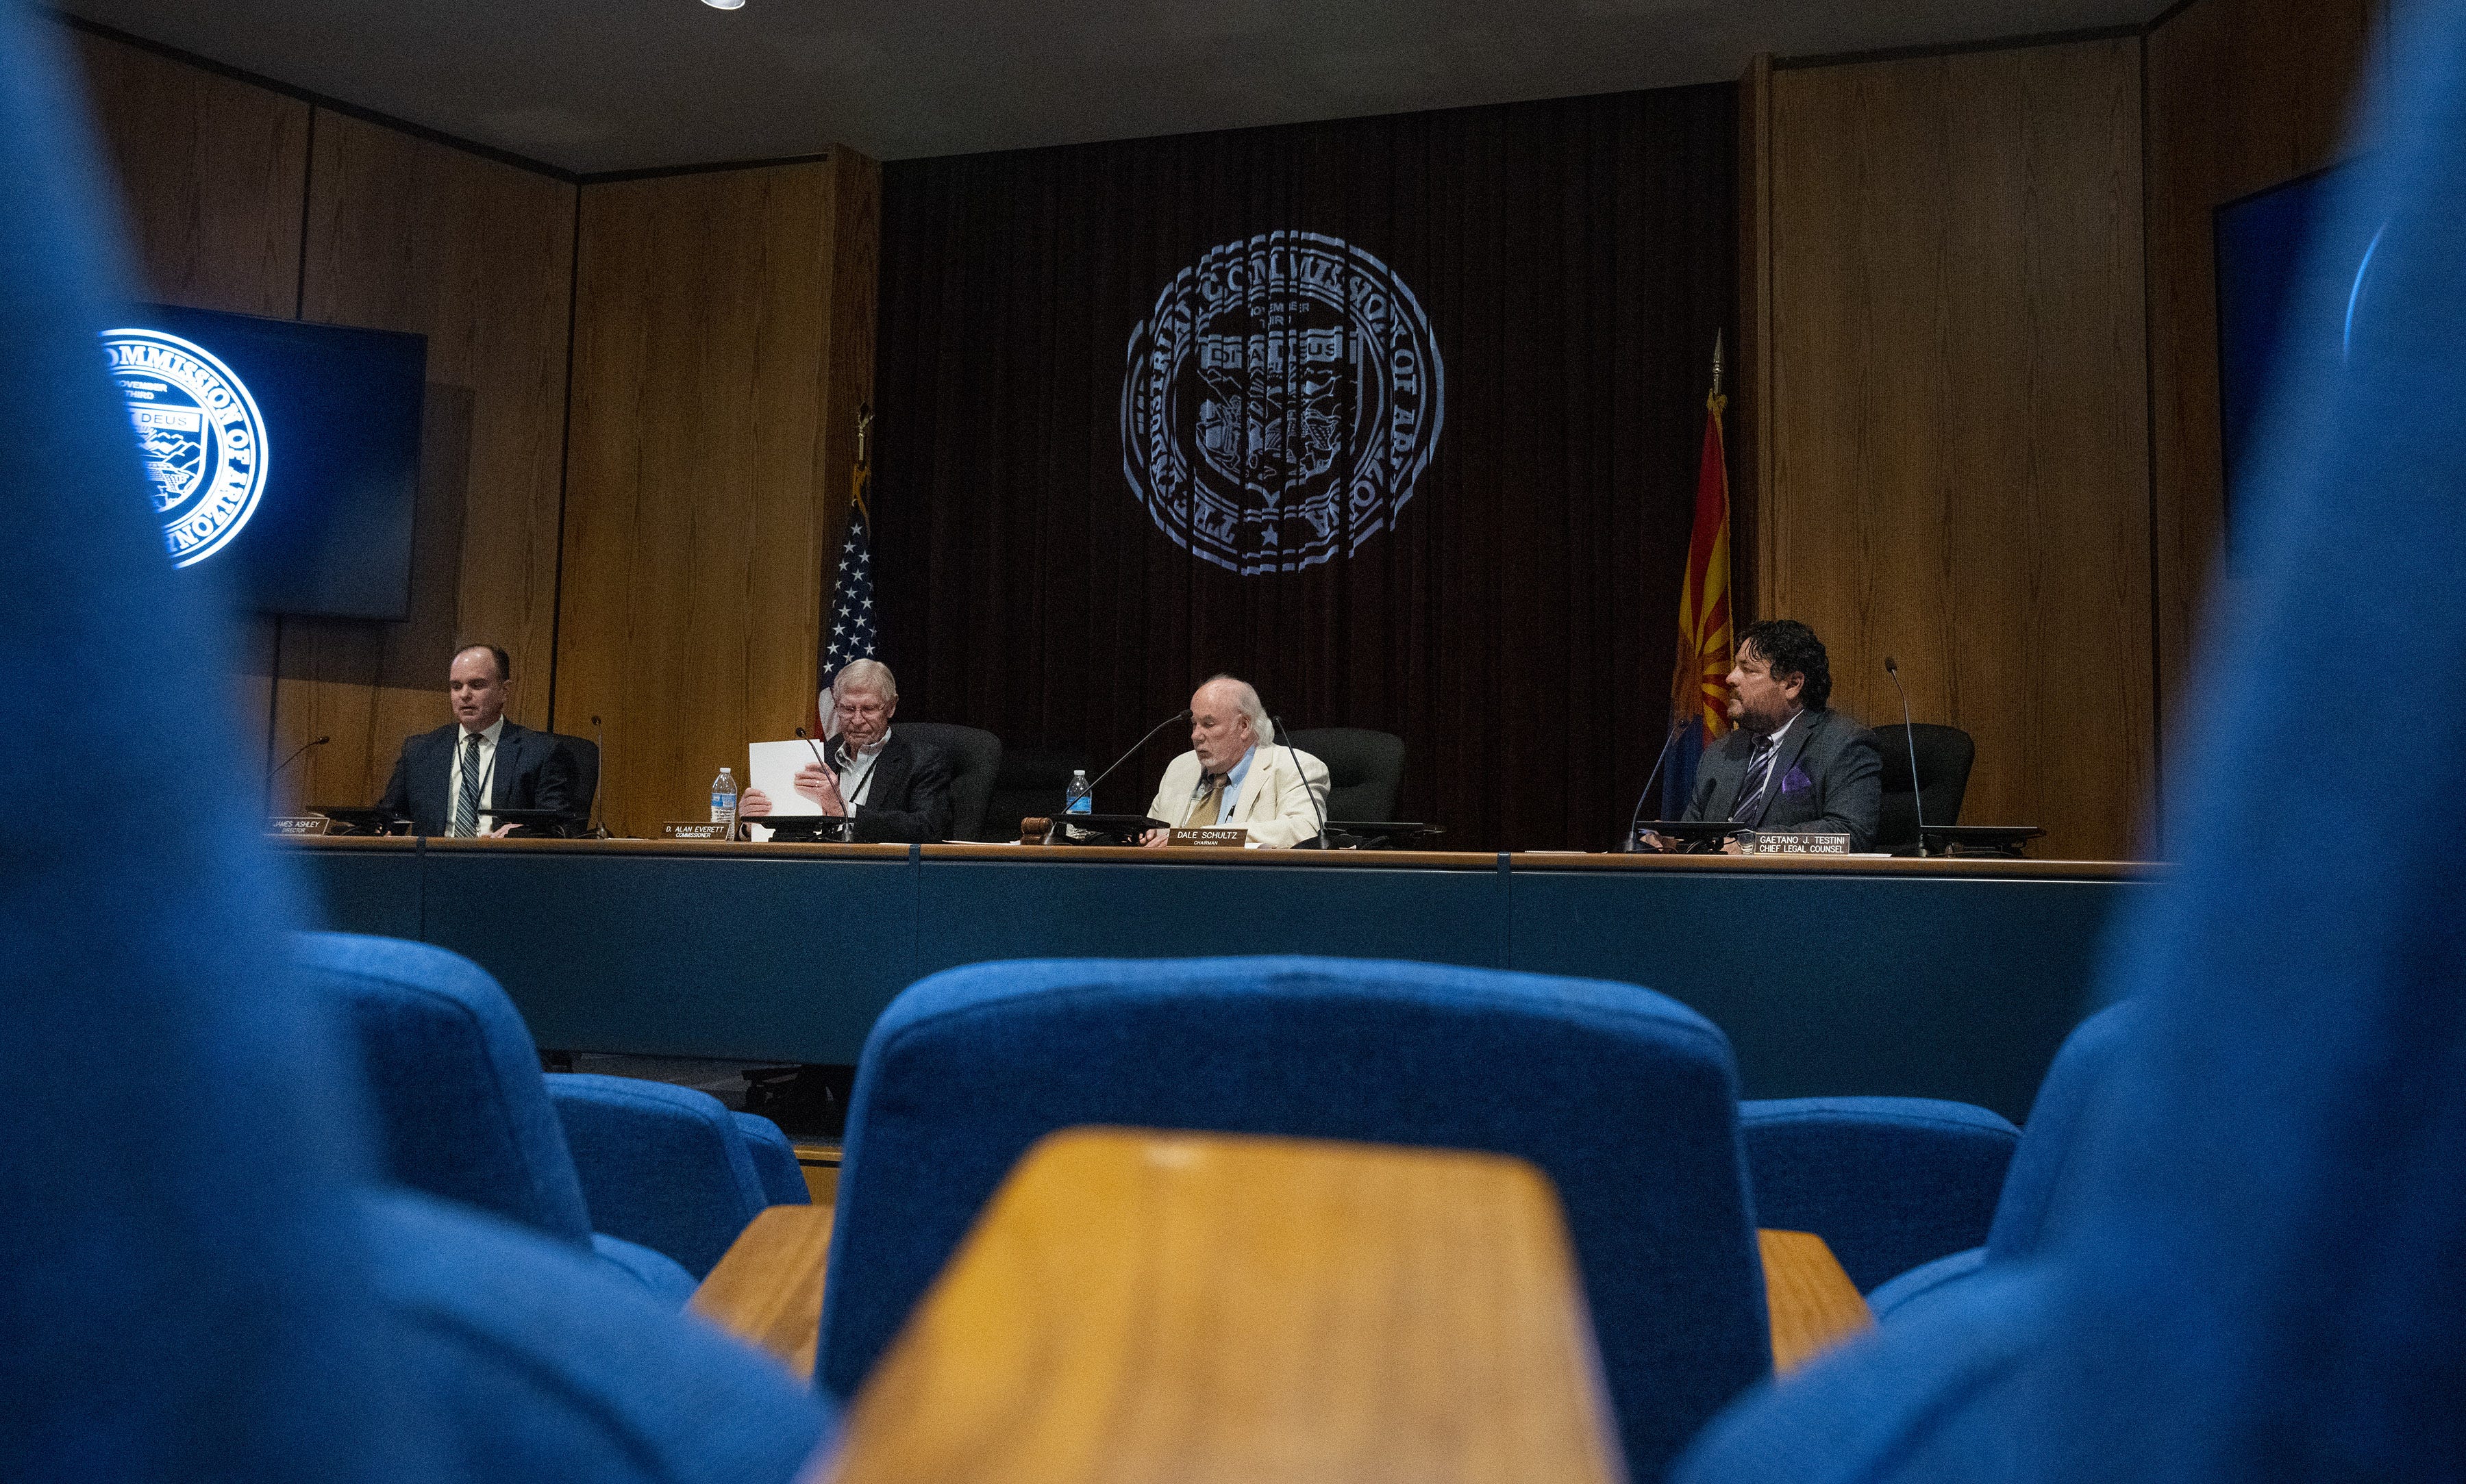 Industrial Commission of Arizona Director James Ashley (from left), Commissioner D. Alan Everett, Chairman Dale Schultz, and Gaetano Testini, chief legal counsel, attend a meeting in Phoenix on July 14, 2022.